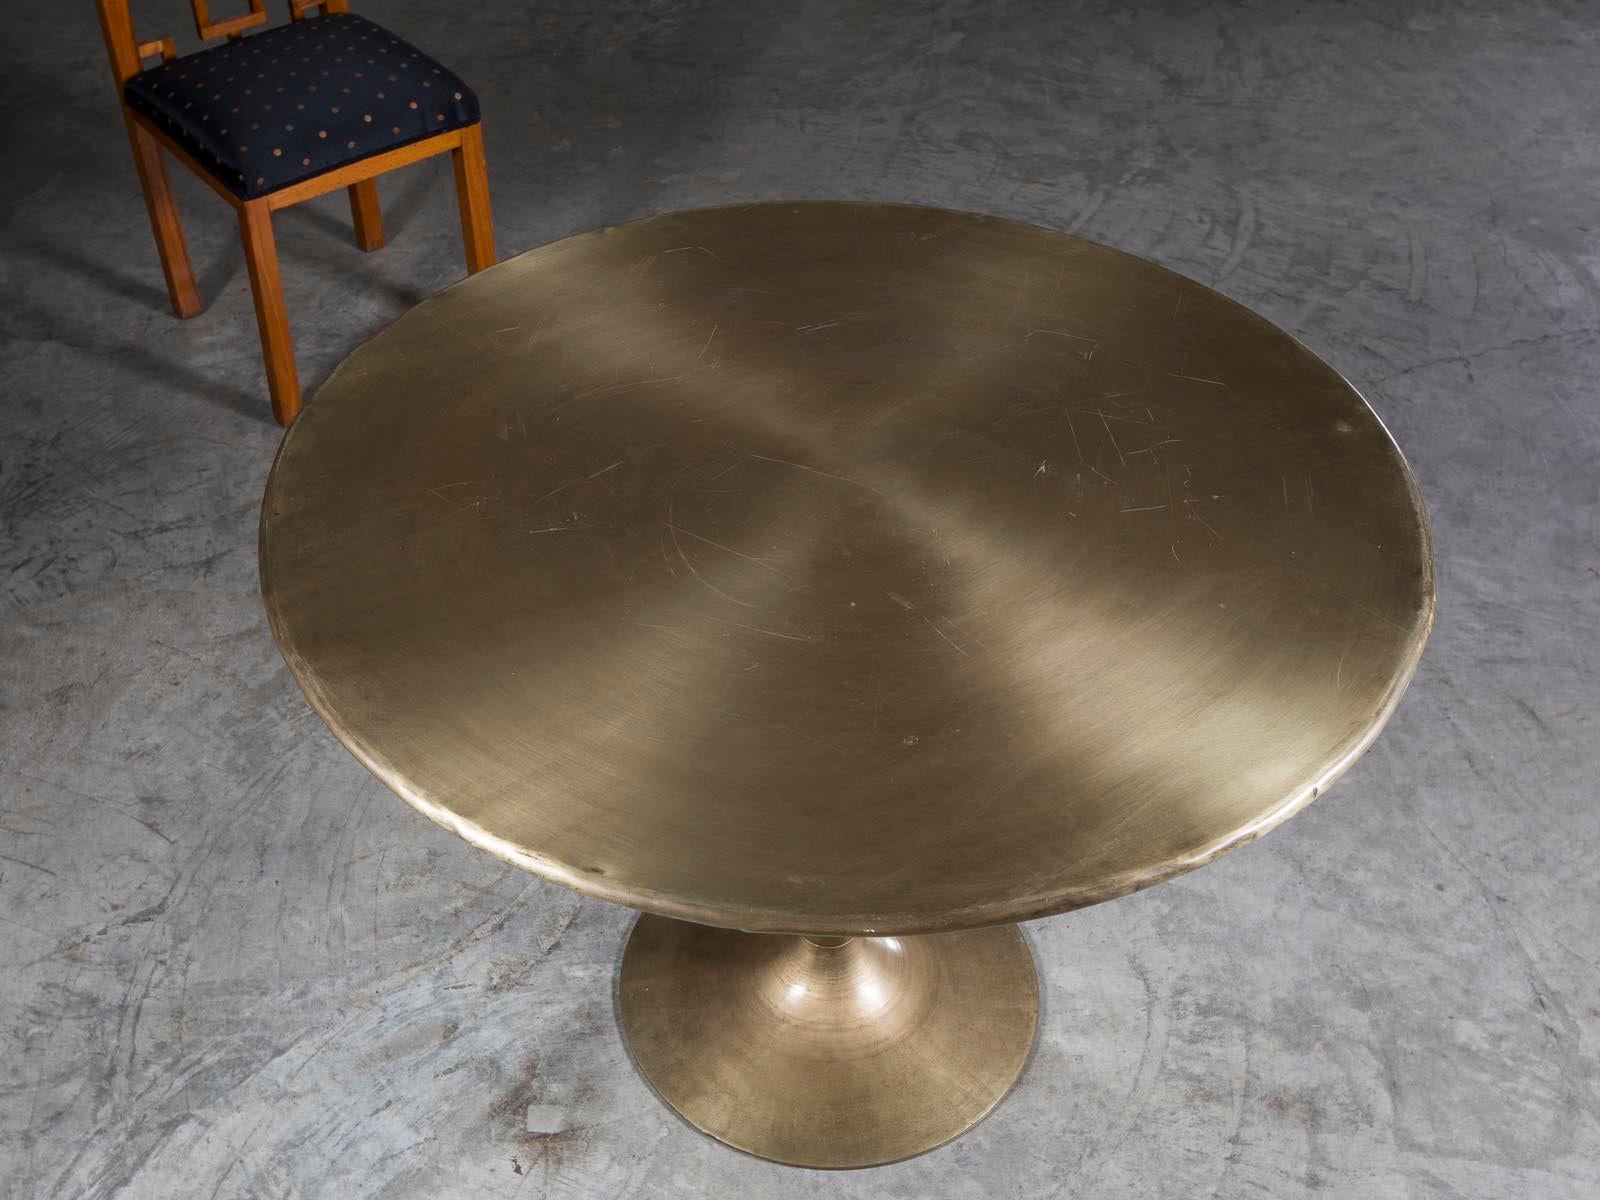 A striking round brass Saarinen style dining table from Holland. The elegant restraint exercised by Saarinen in the creation of his famous Tulip table is evident here withe circular base supporting a vertical stem with the round top of the table all